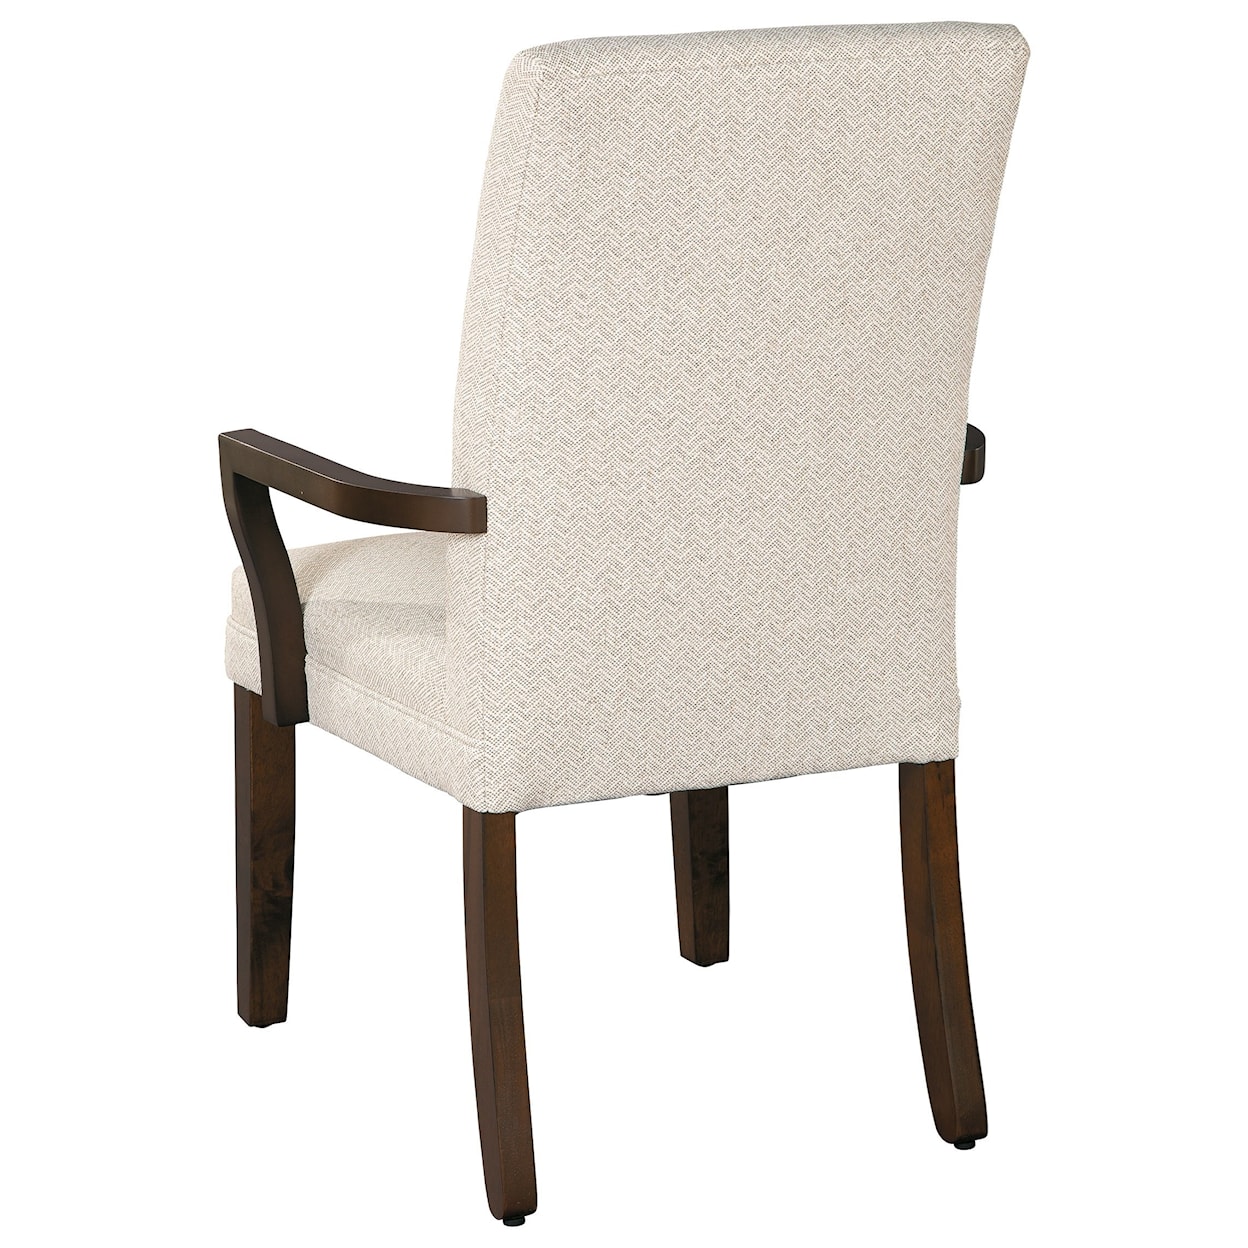 Hekman Comfort Zone Dining Jenny Dining Arm Chair